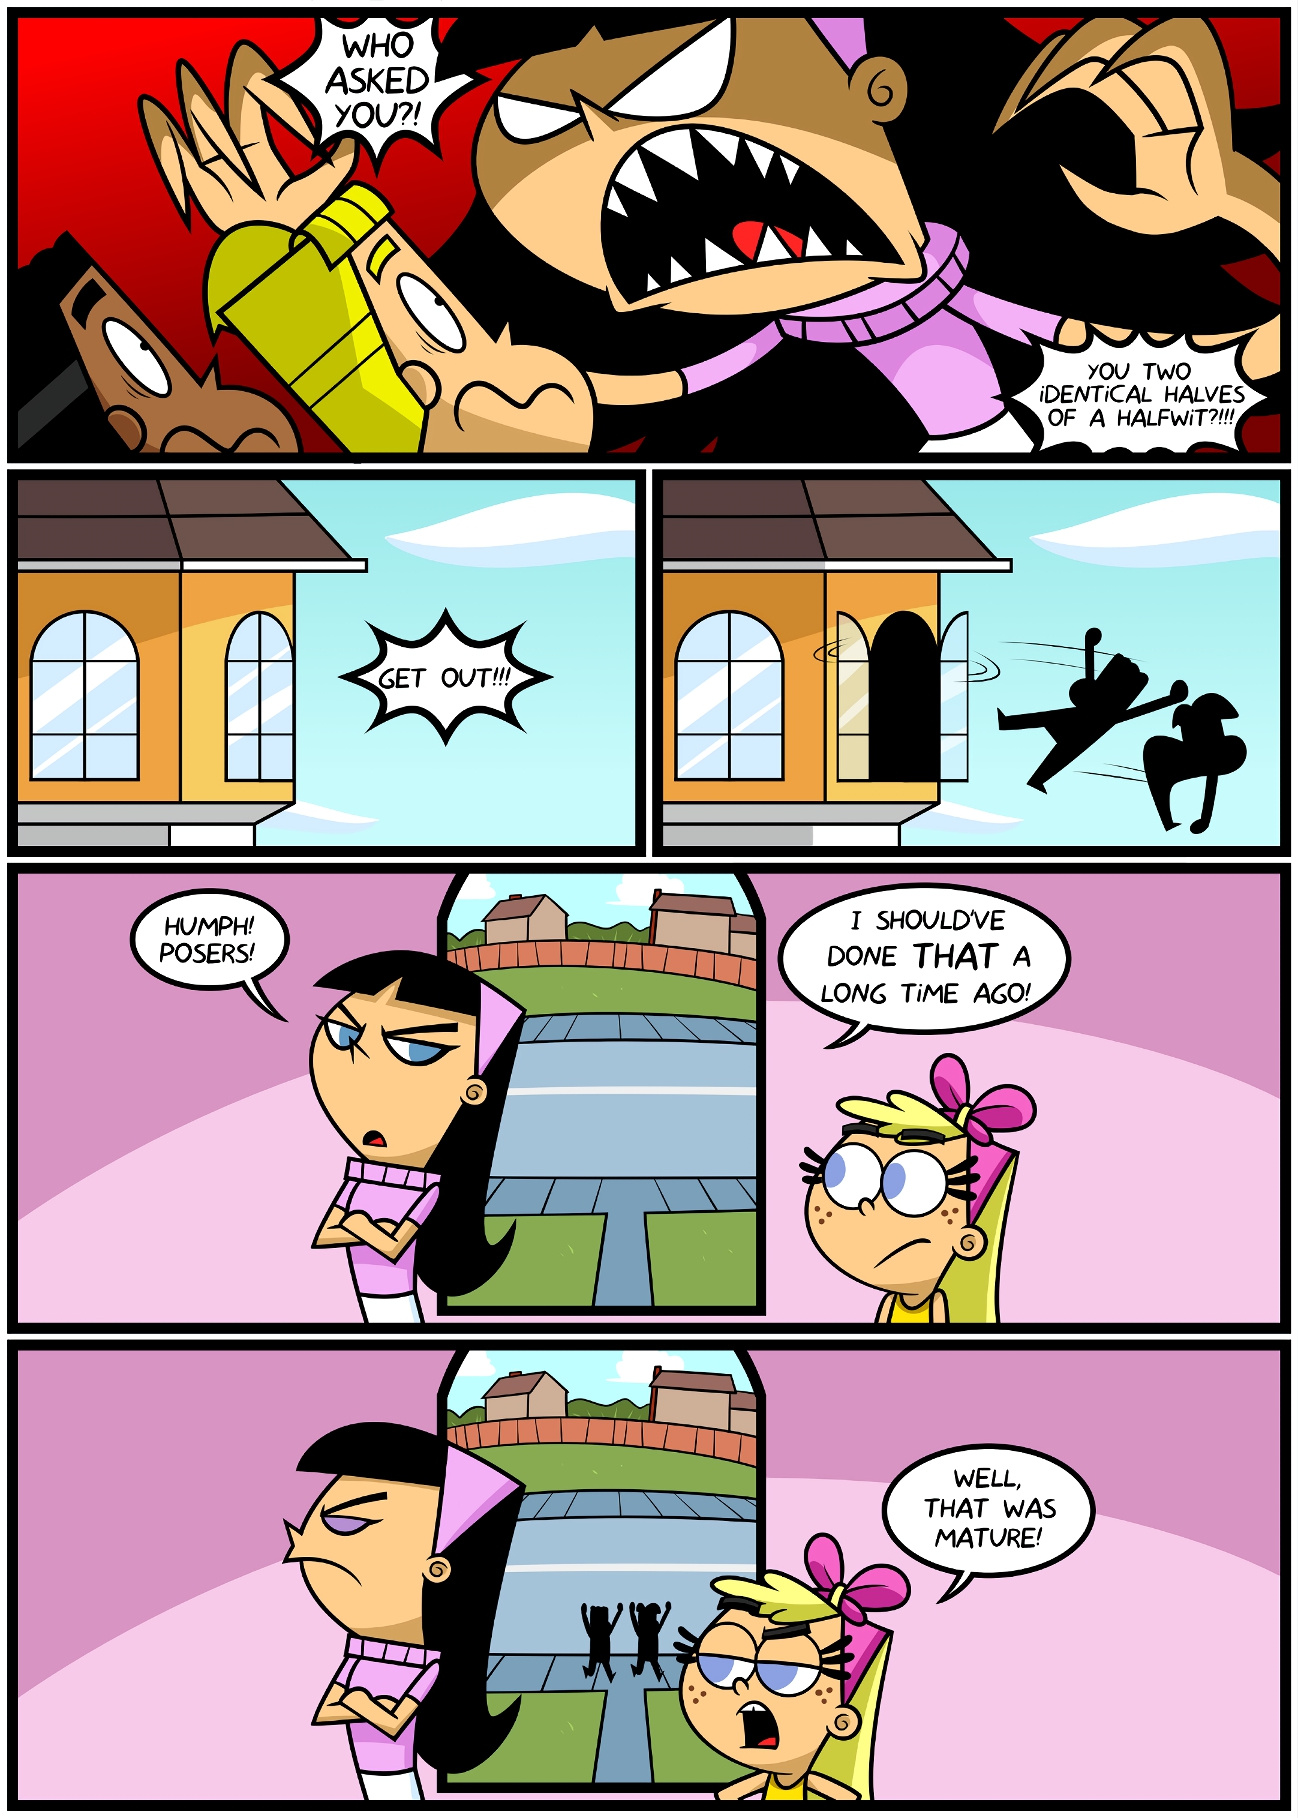 1298px x 1818px - The Fairly OddParents: Let the games begin! - Multporn Comics & Hentai manga